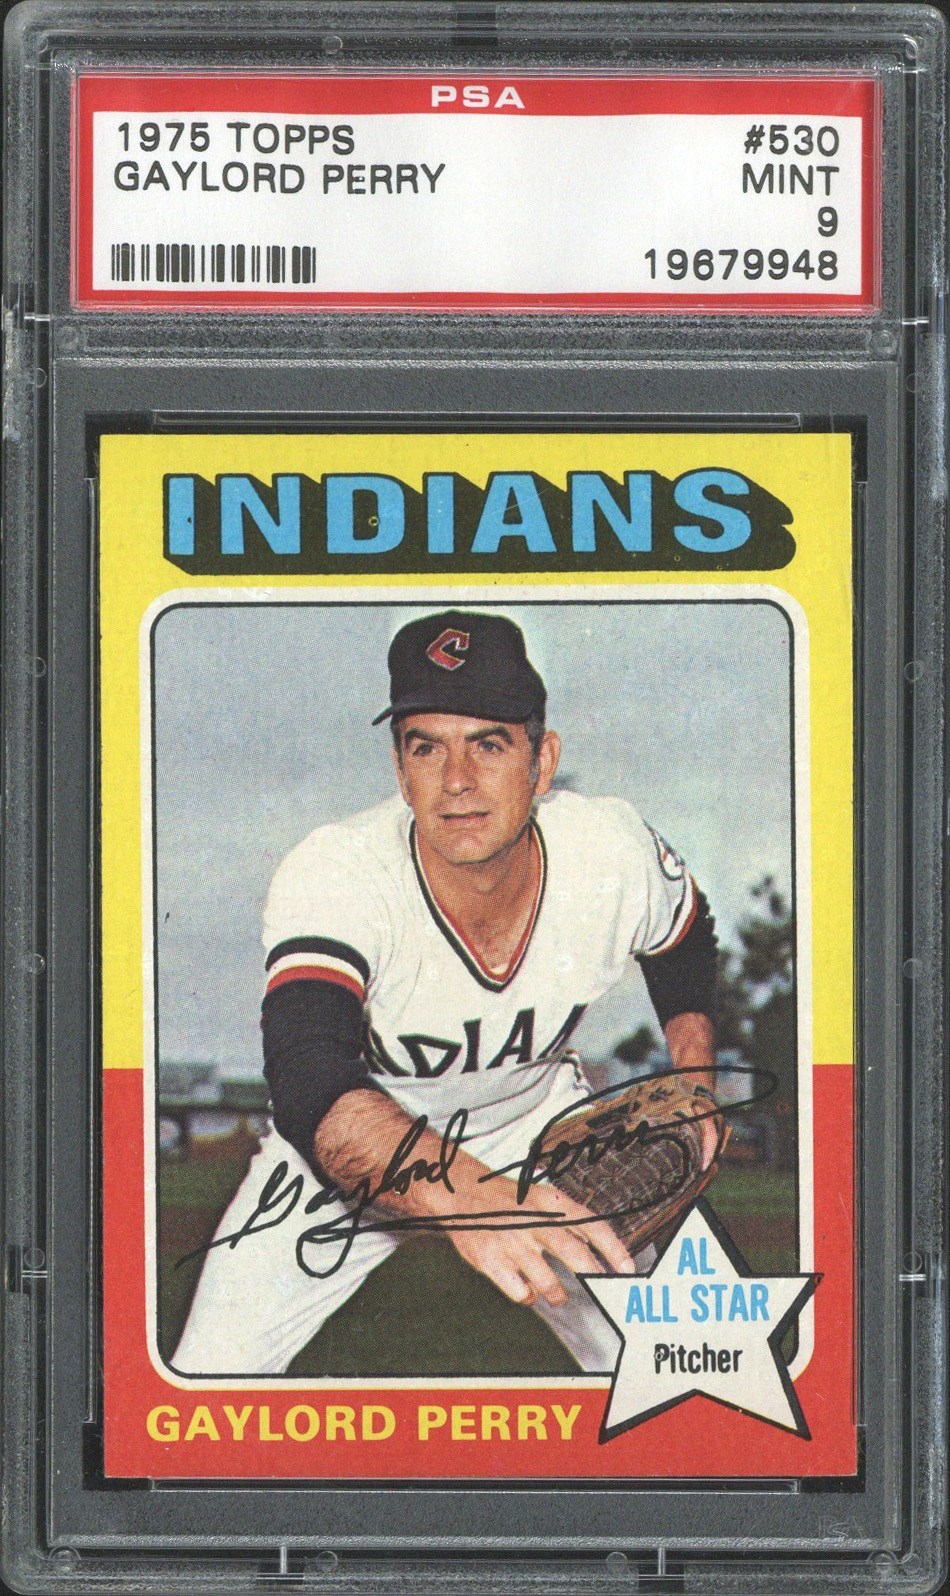 1975 Topps #530 Gaylord Perry (HOF) - PSA MINT 9